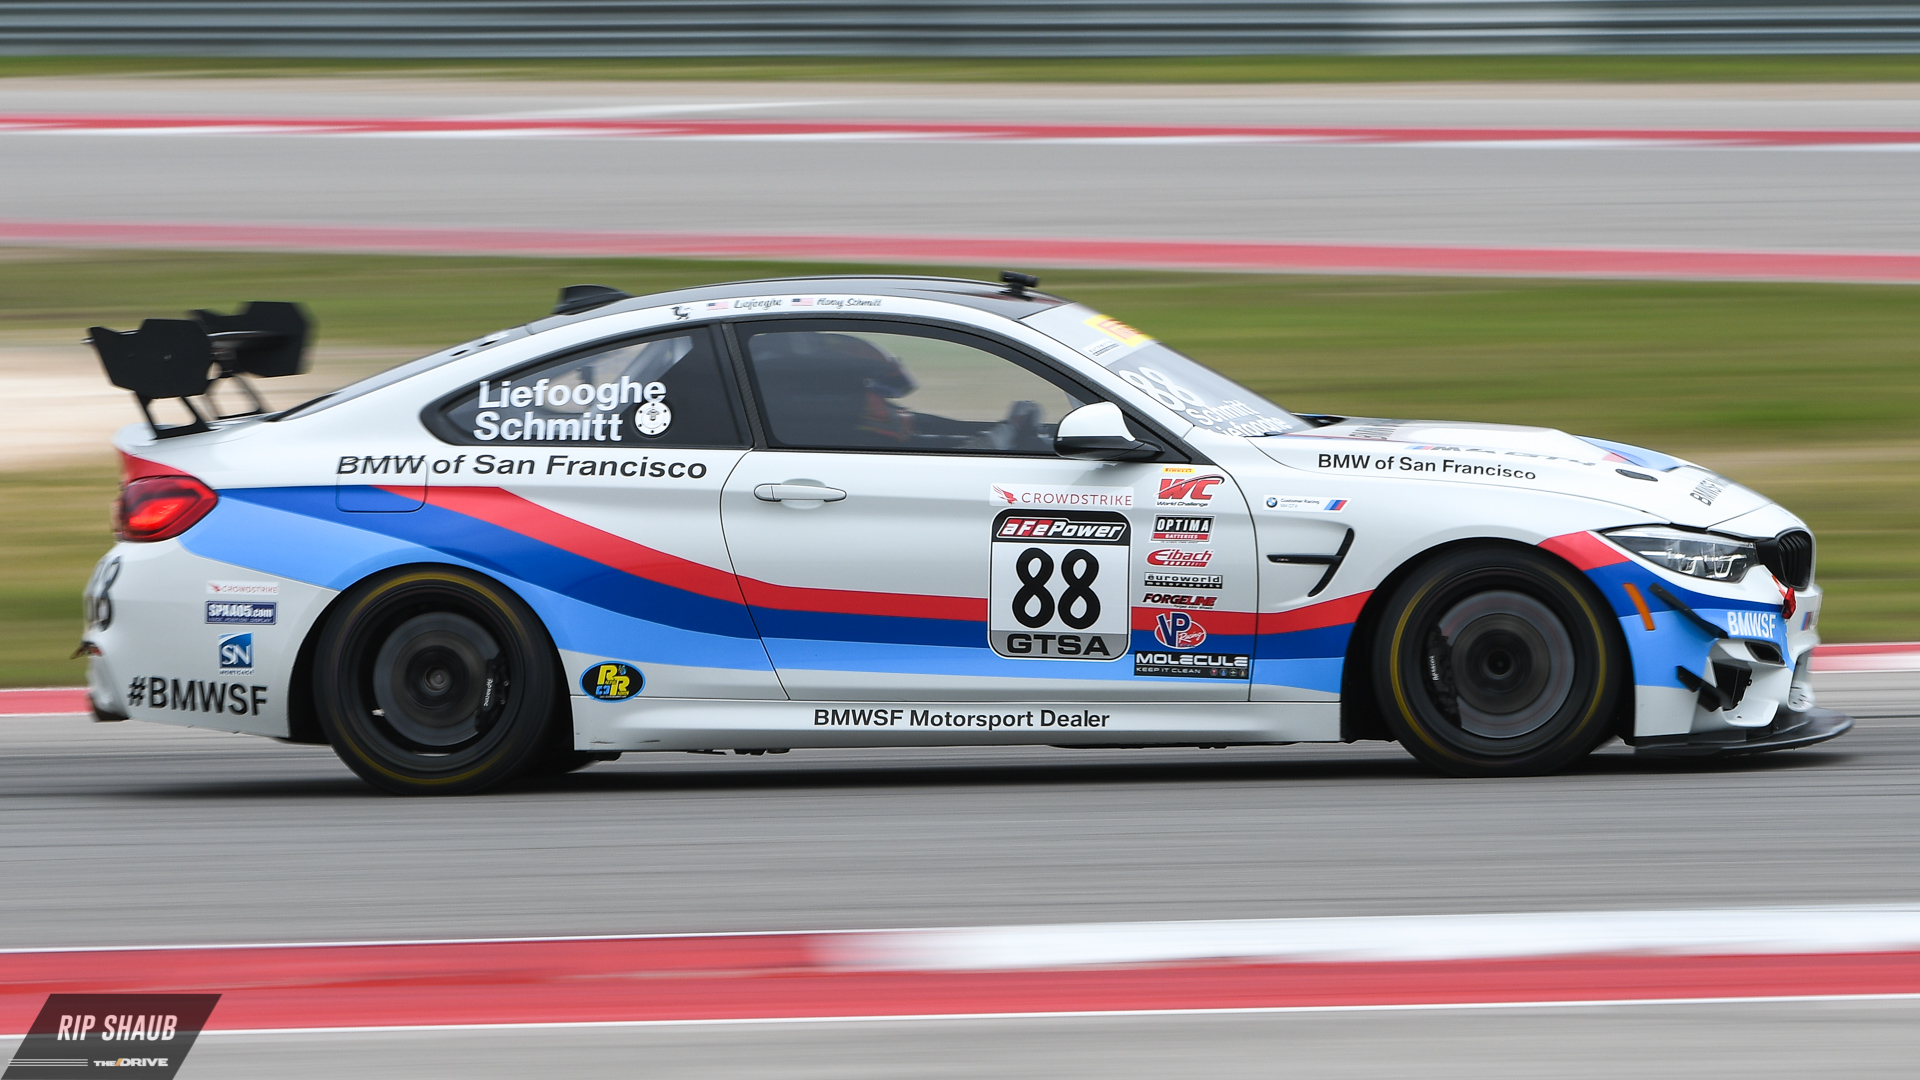 Stephen Cameron Racing with Henry Schmitt and Greg Liefooghe in a BMW M4 GT4., <i>© Rip Shaub - All Rights Reserved</i>